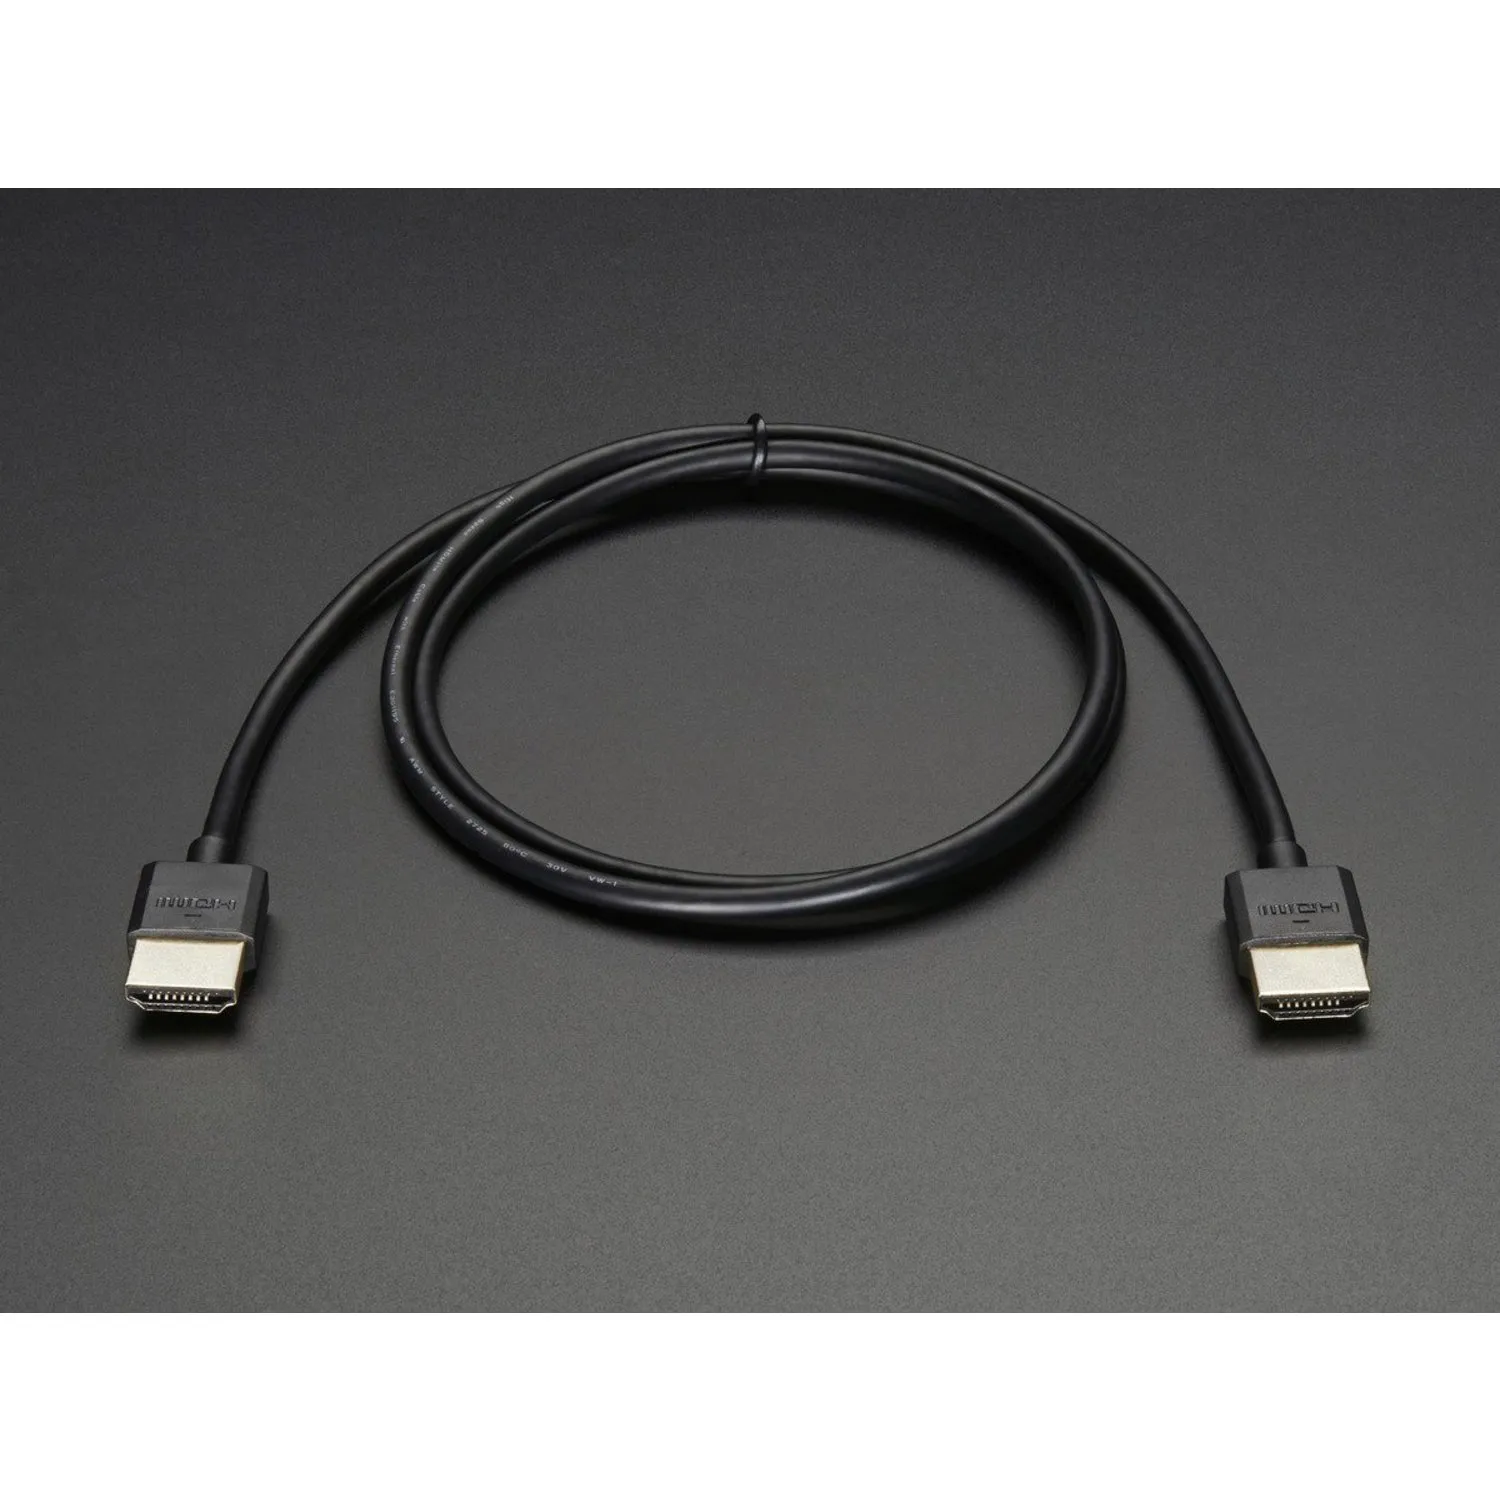 Photo of Slim HDMI Cable - 914mm / 3 feet long